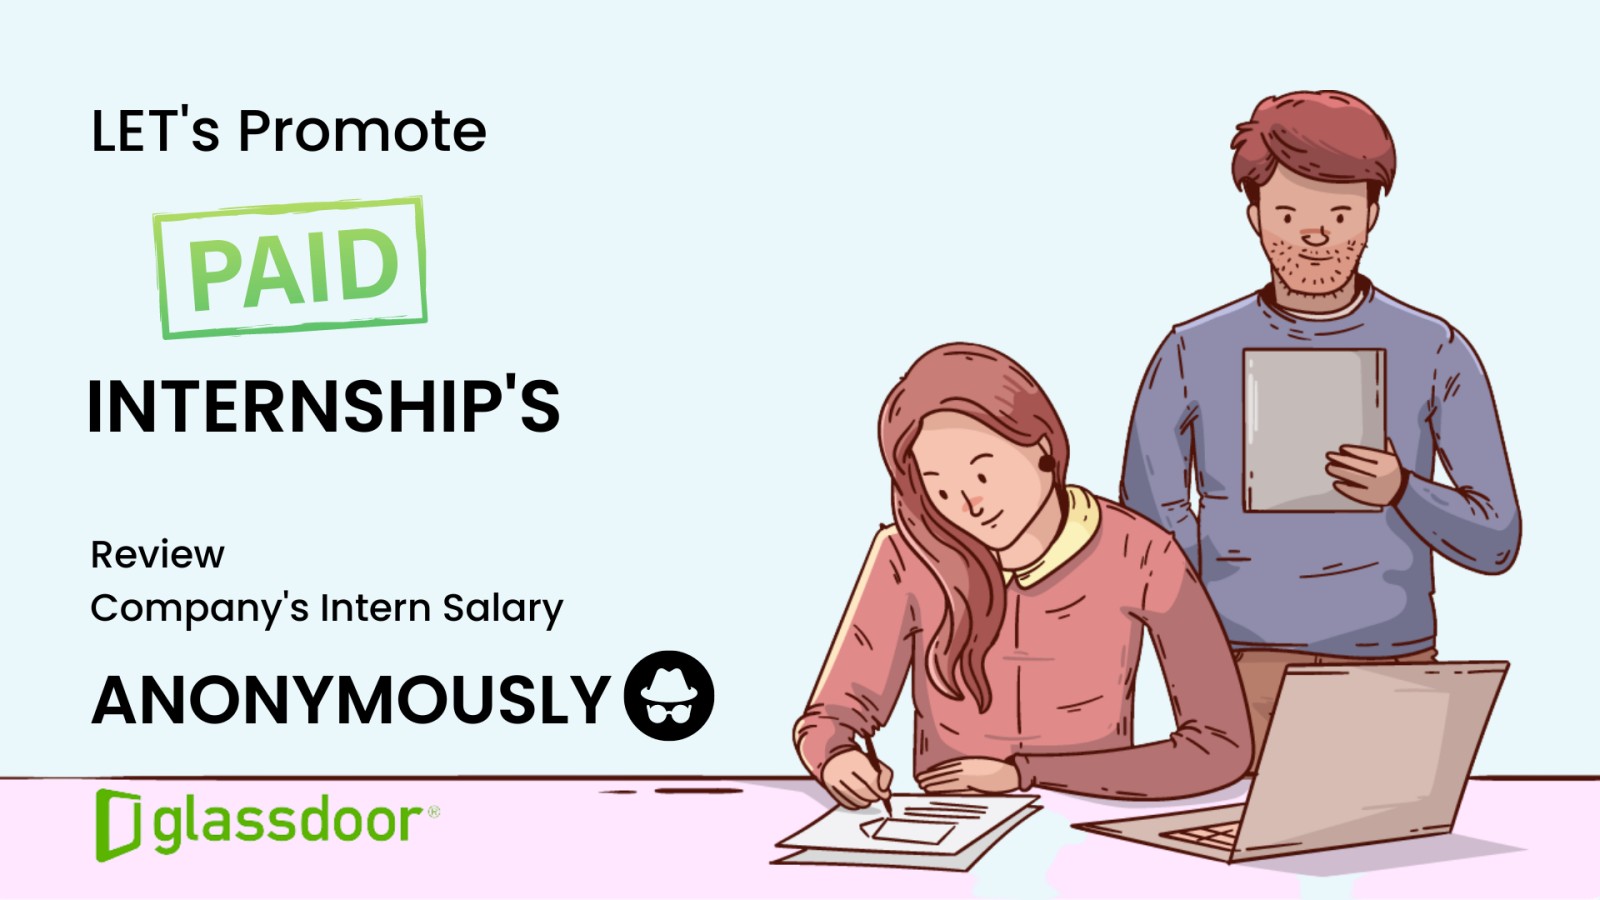 promote-internship-pay-and-set-industry-standards-through-glassdoor